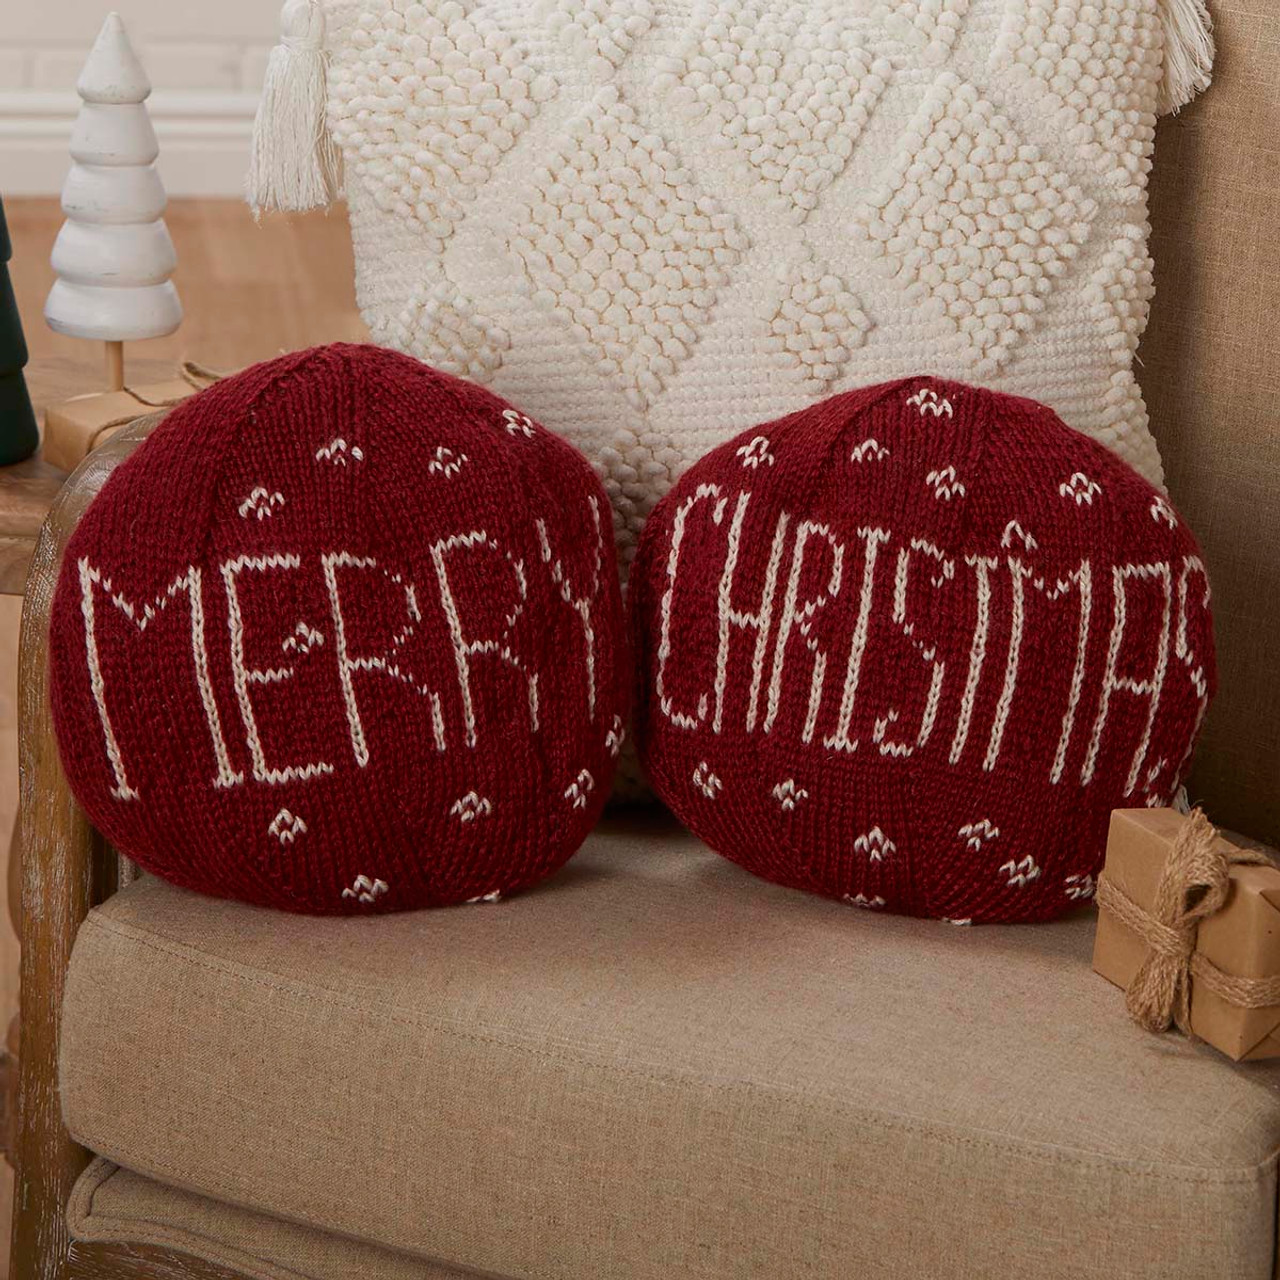 Bauble Pillows Knit Pattern Free Download